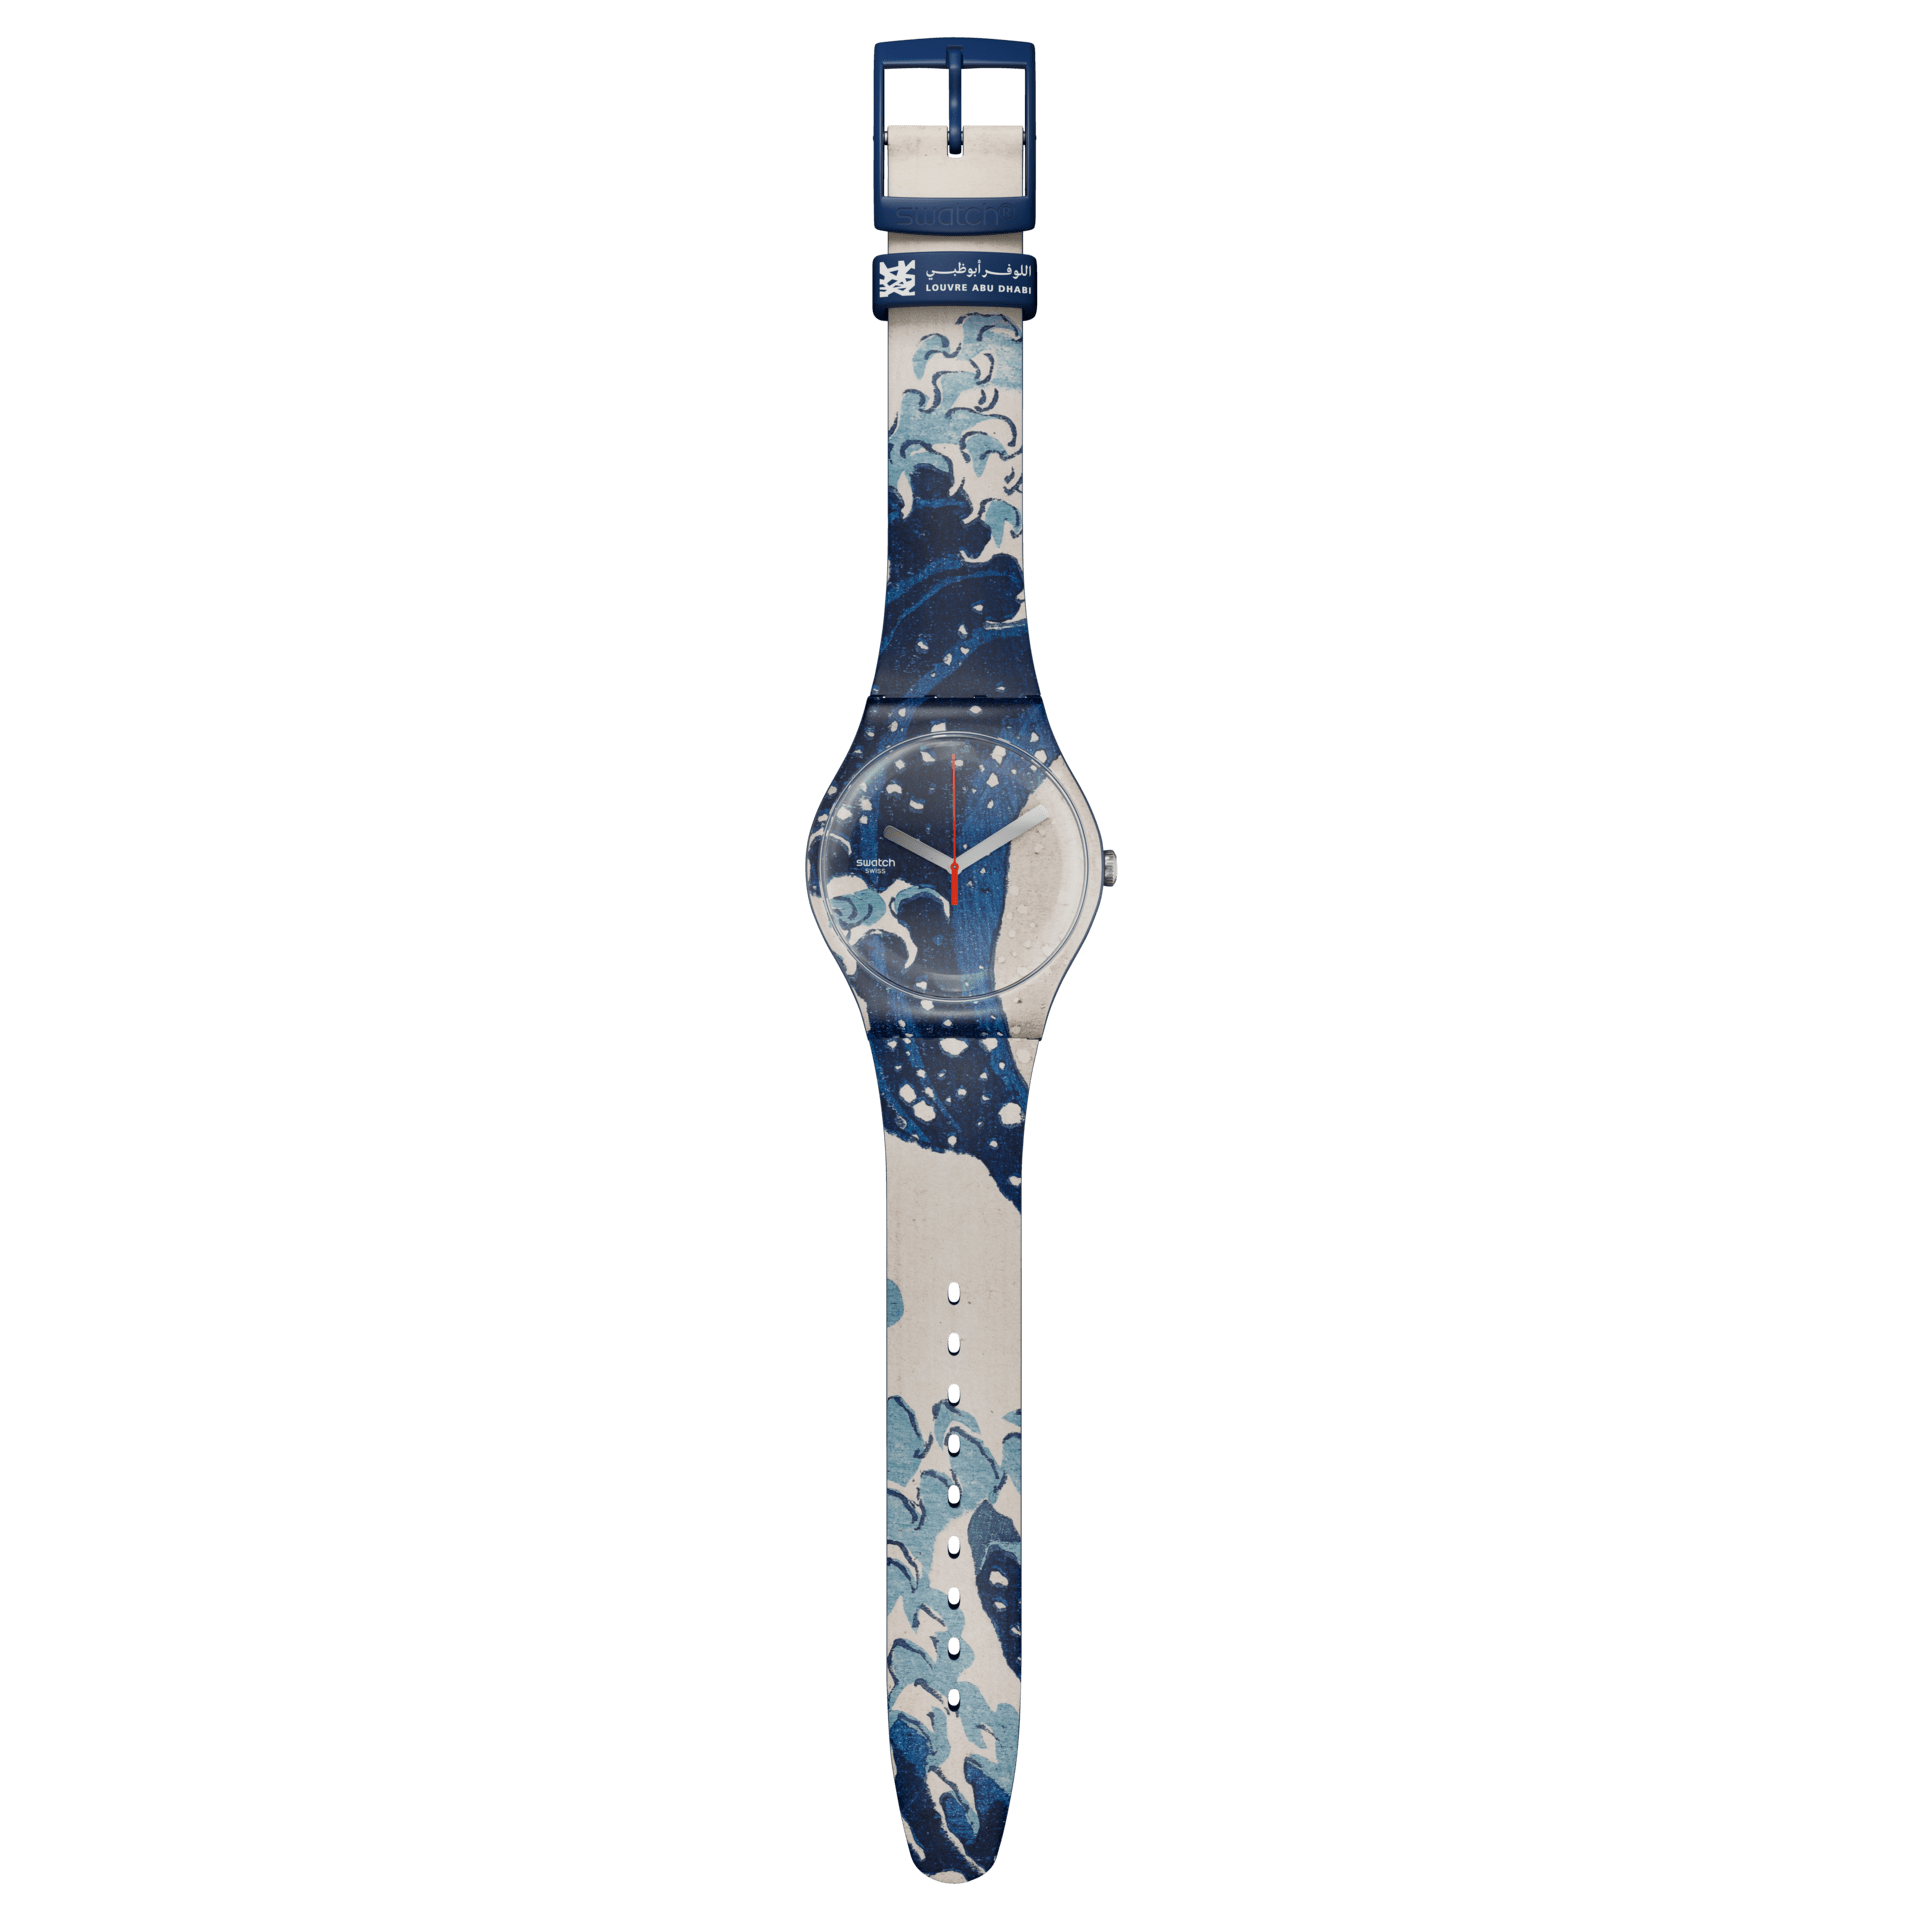 "THE GREAT WAVE BY HOKUSAI & ASTROLABE" Gallery Image #2